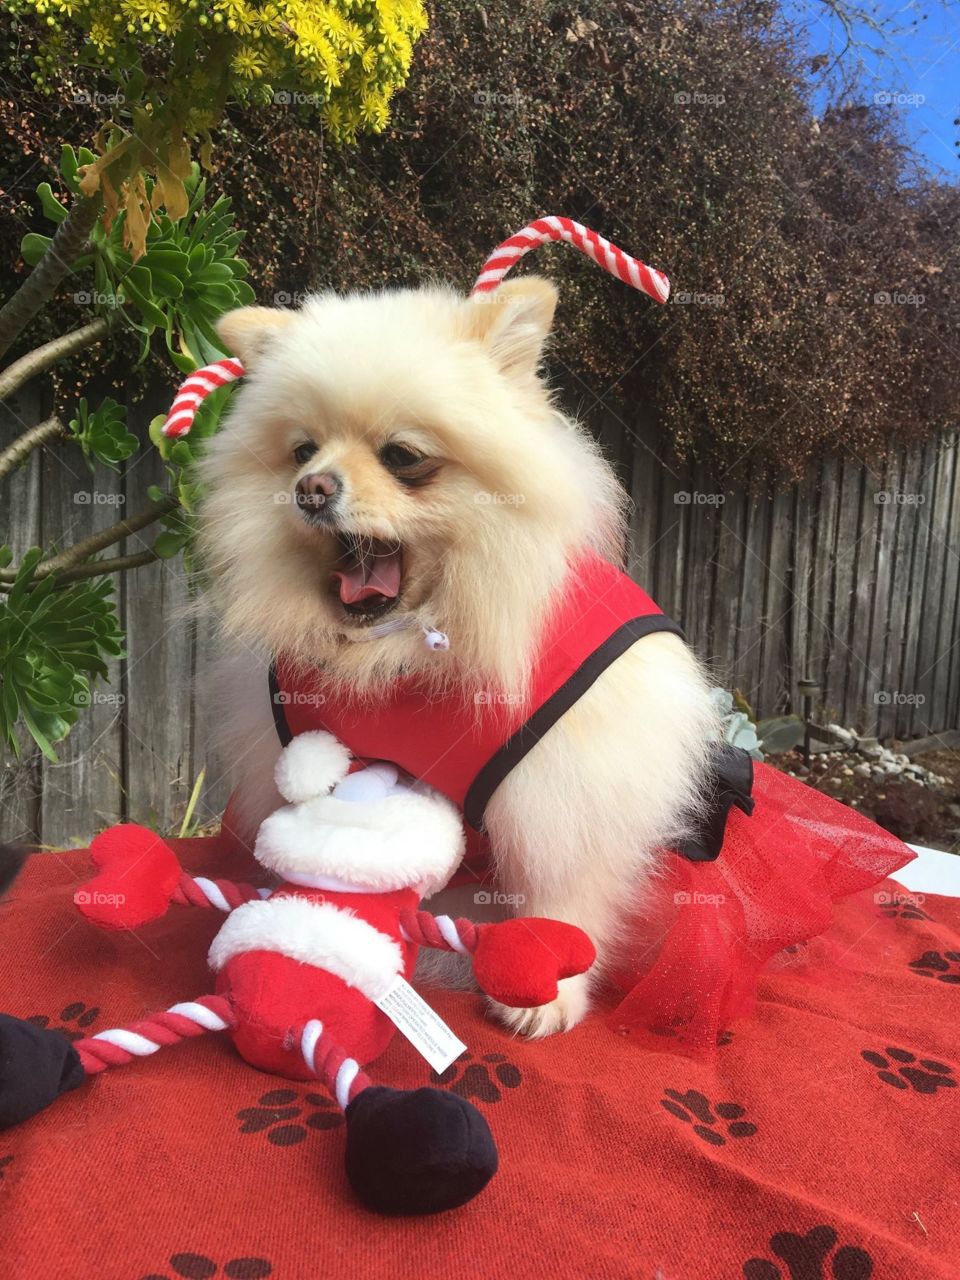 Cute Pom with the huge smile on Christmas Day at Cheltenham Melbourne Australia 